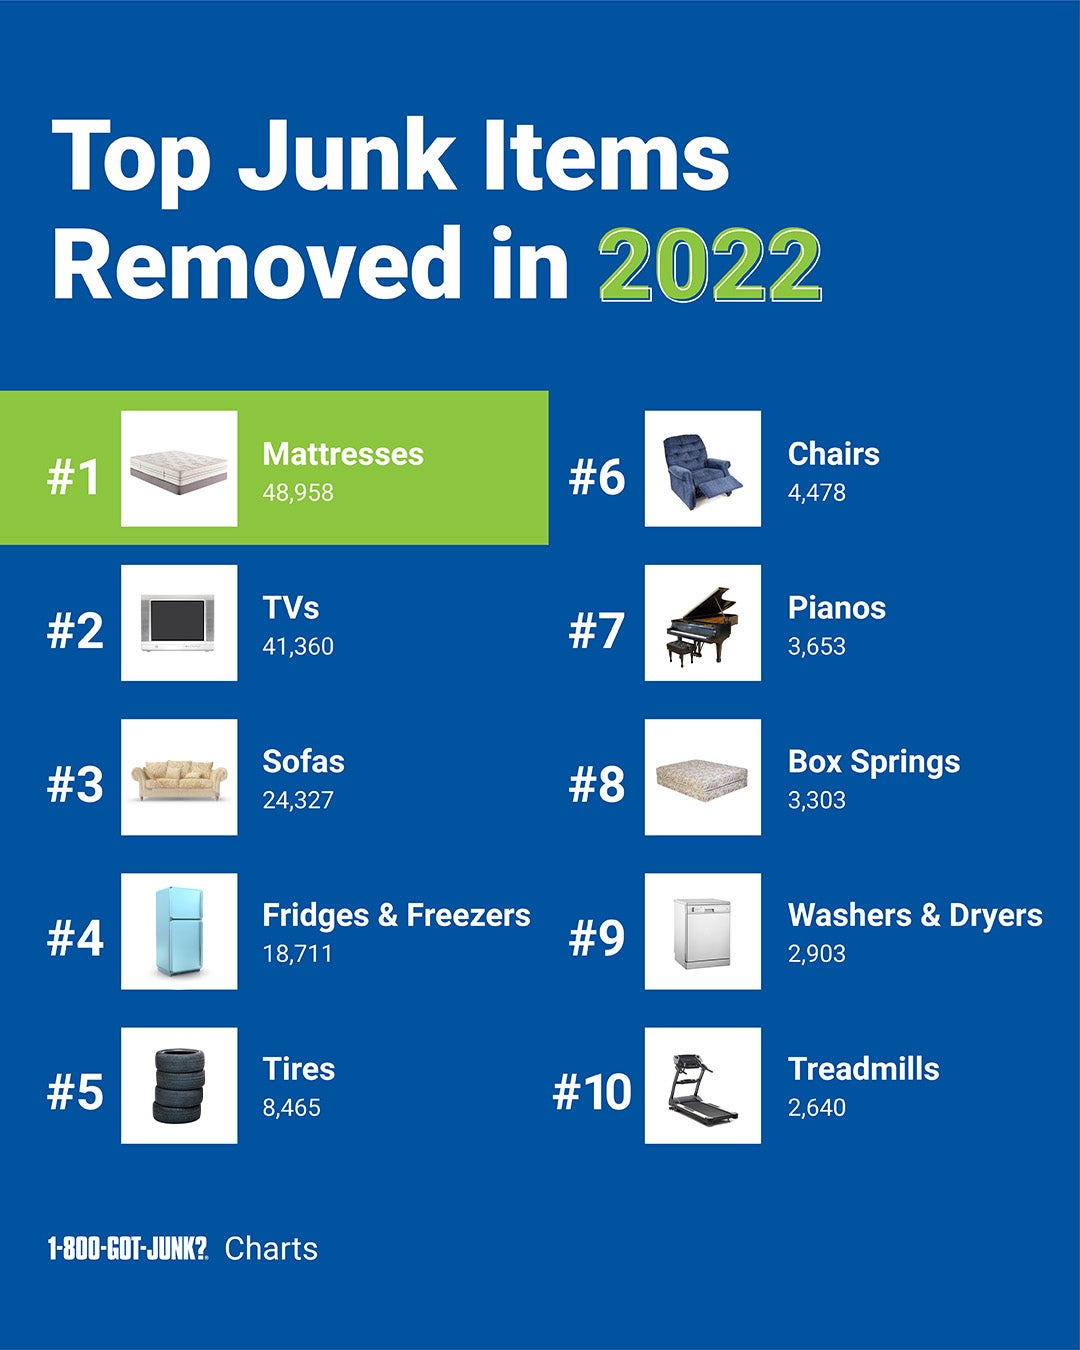 Image of the top junk items removed in 2022 listed out with pictures of the items next to it